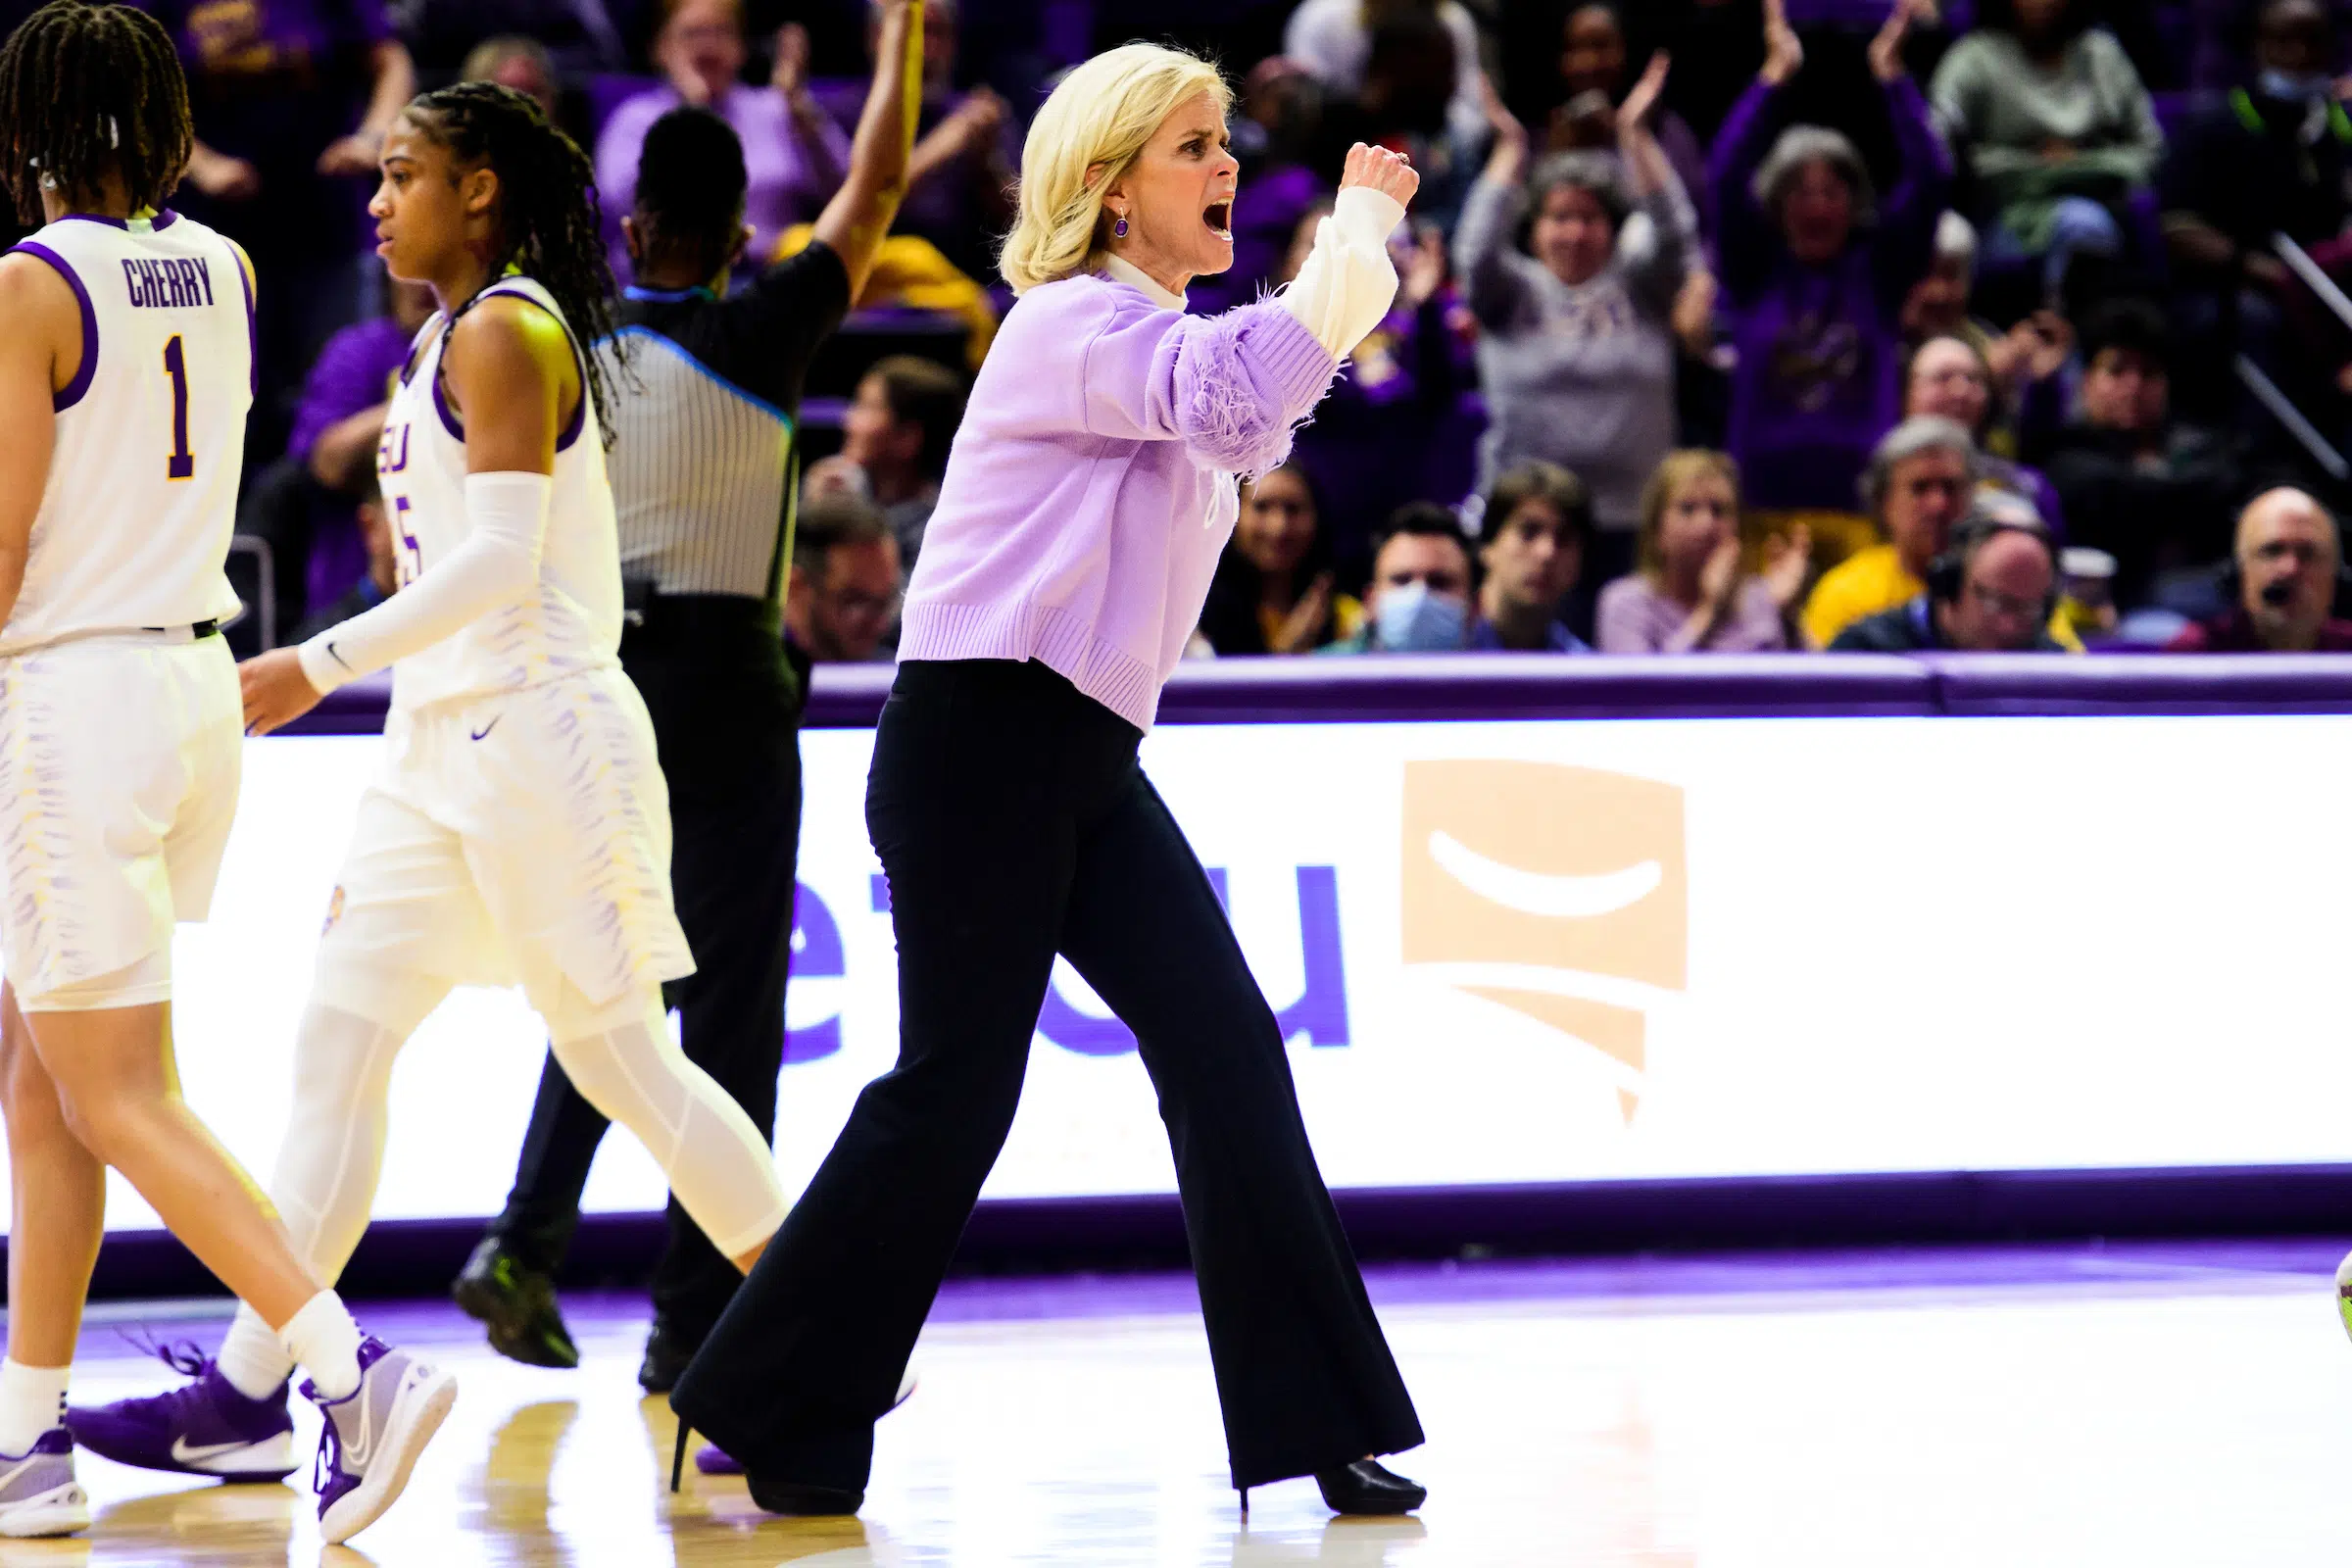 LSU women's basketball coach declines comment about former player Brittany Griner